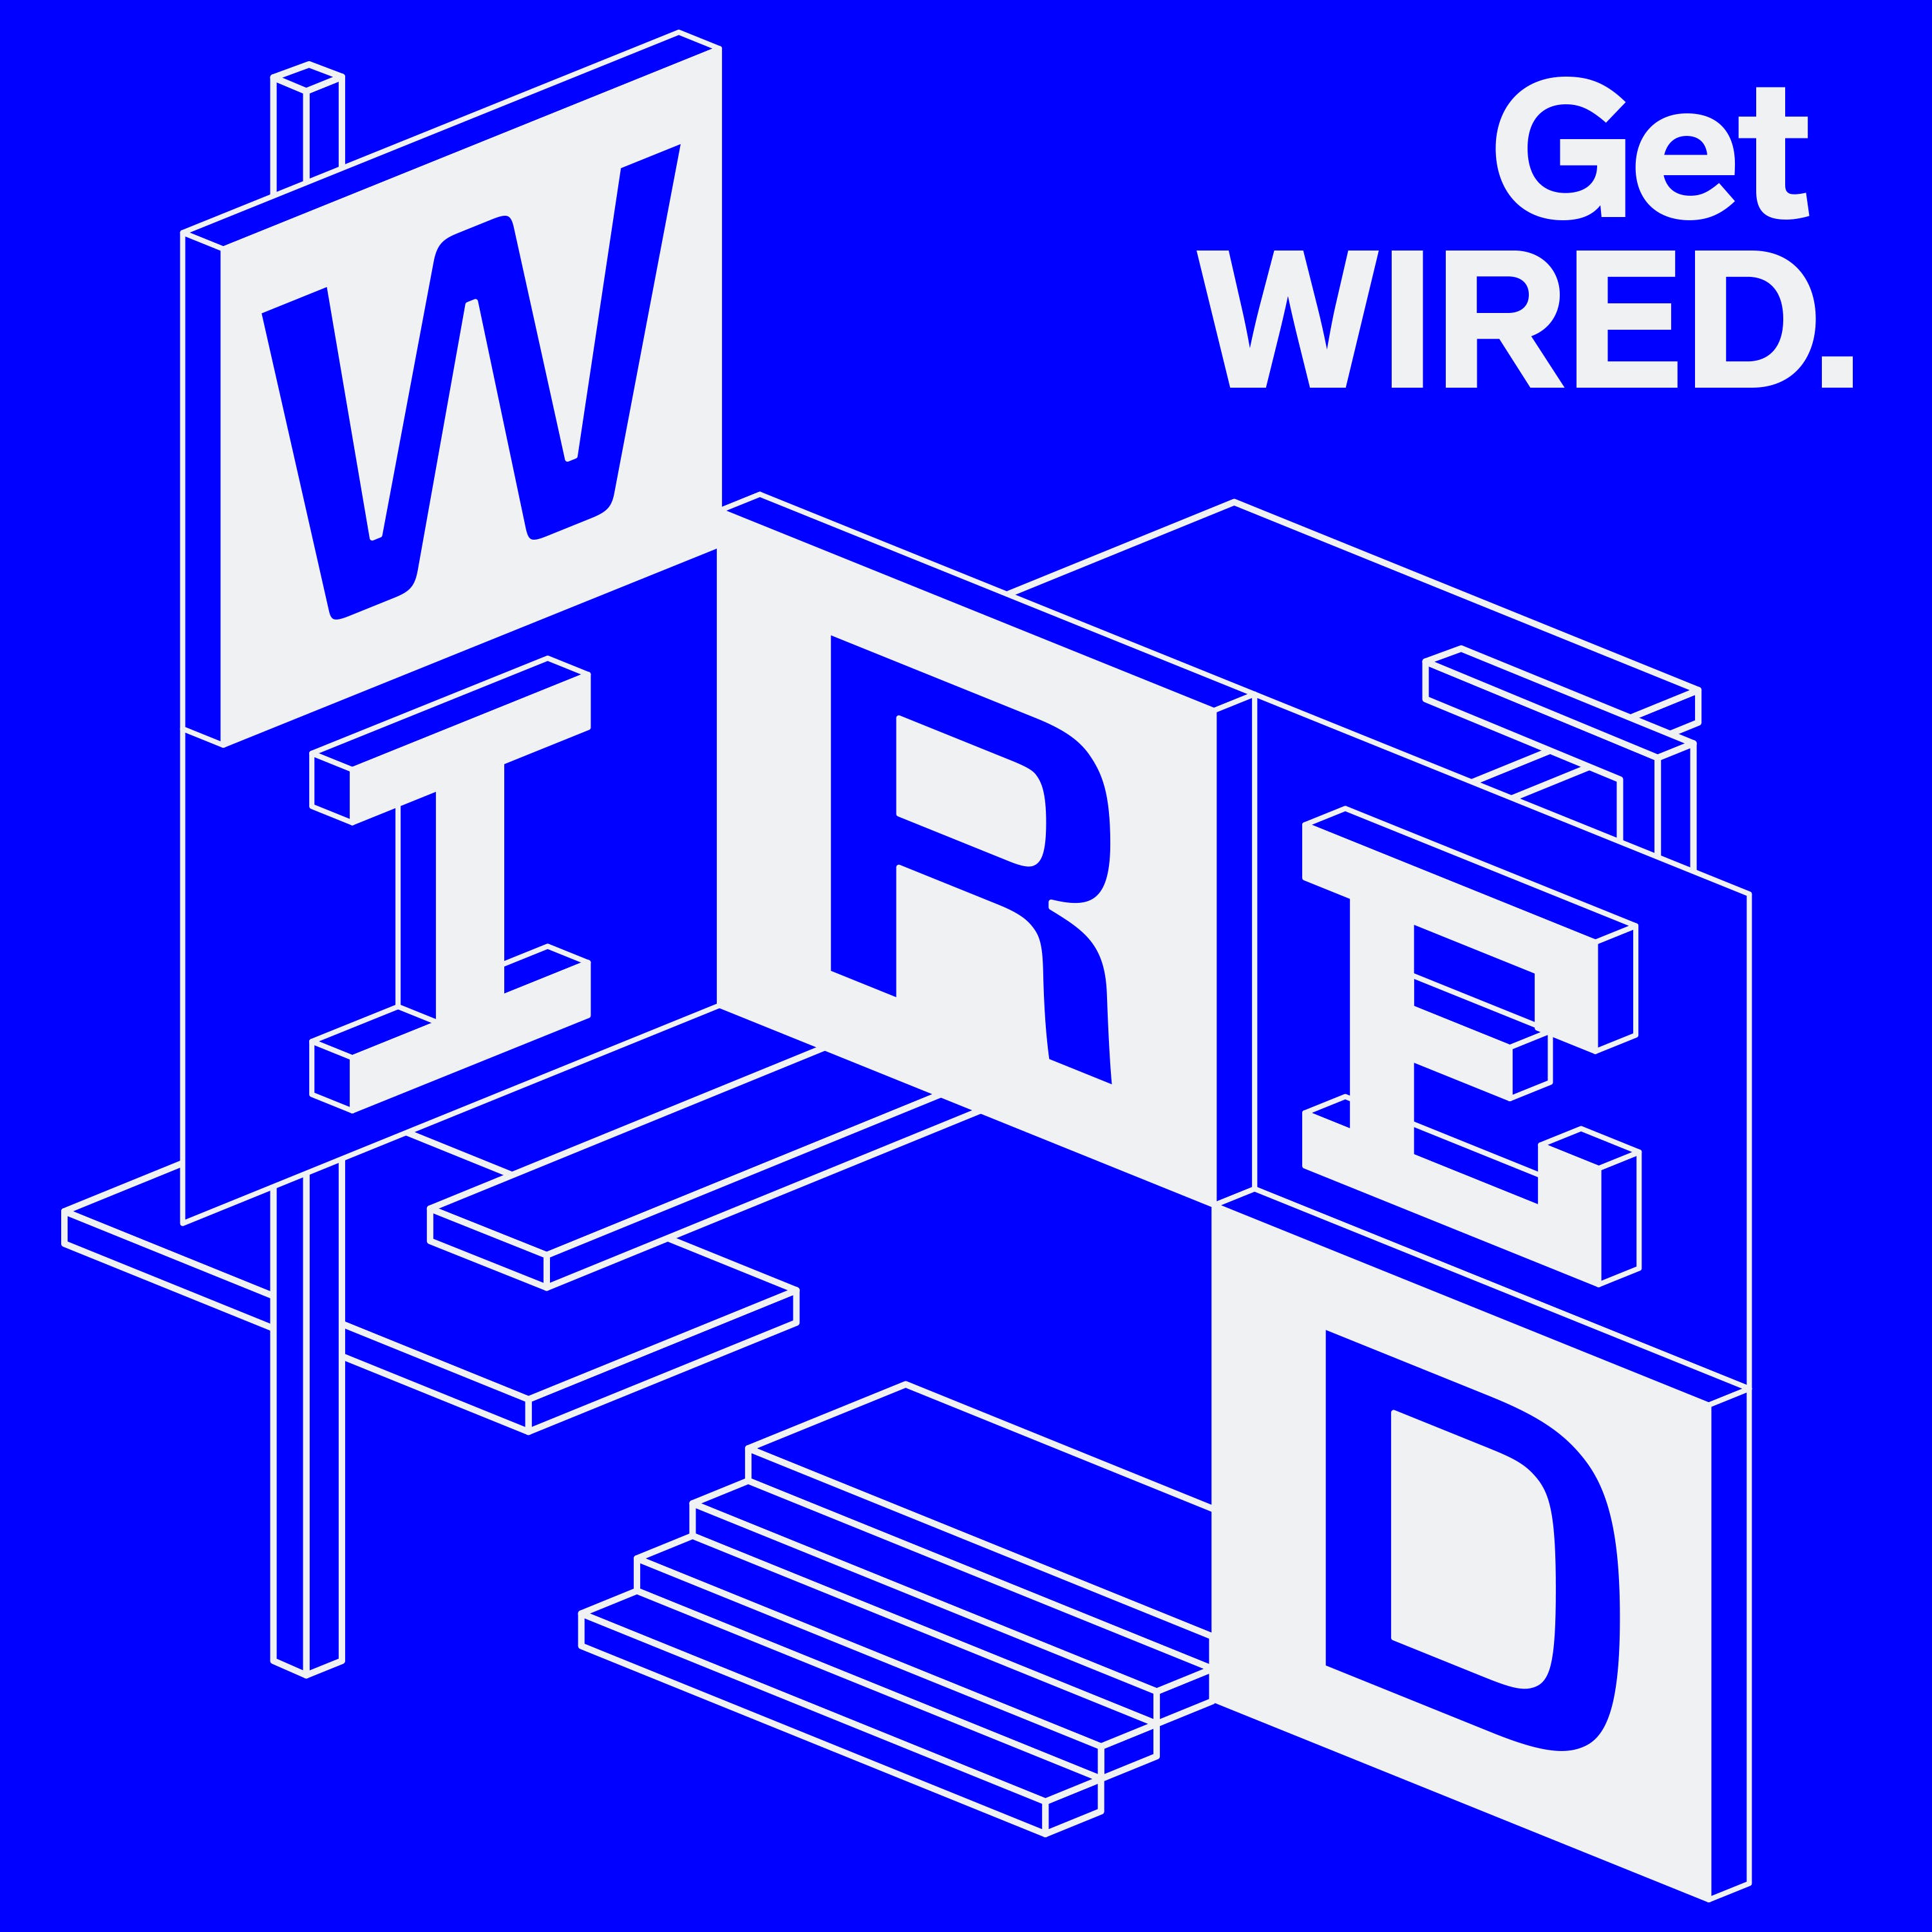 Gadget Lab: Weekly Tech News from WIRED